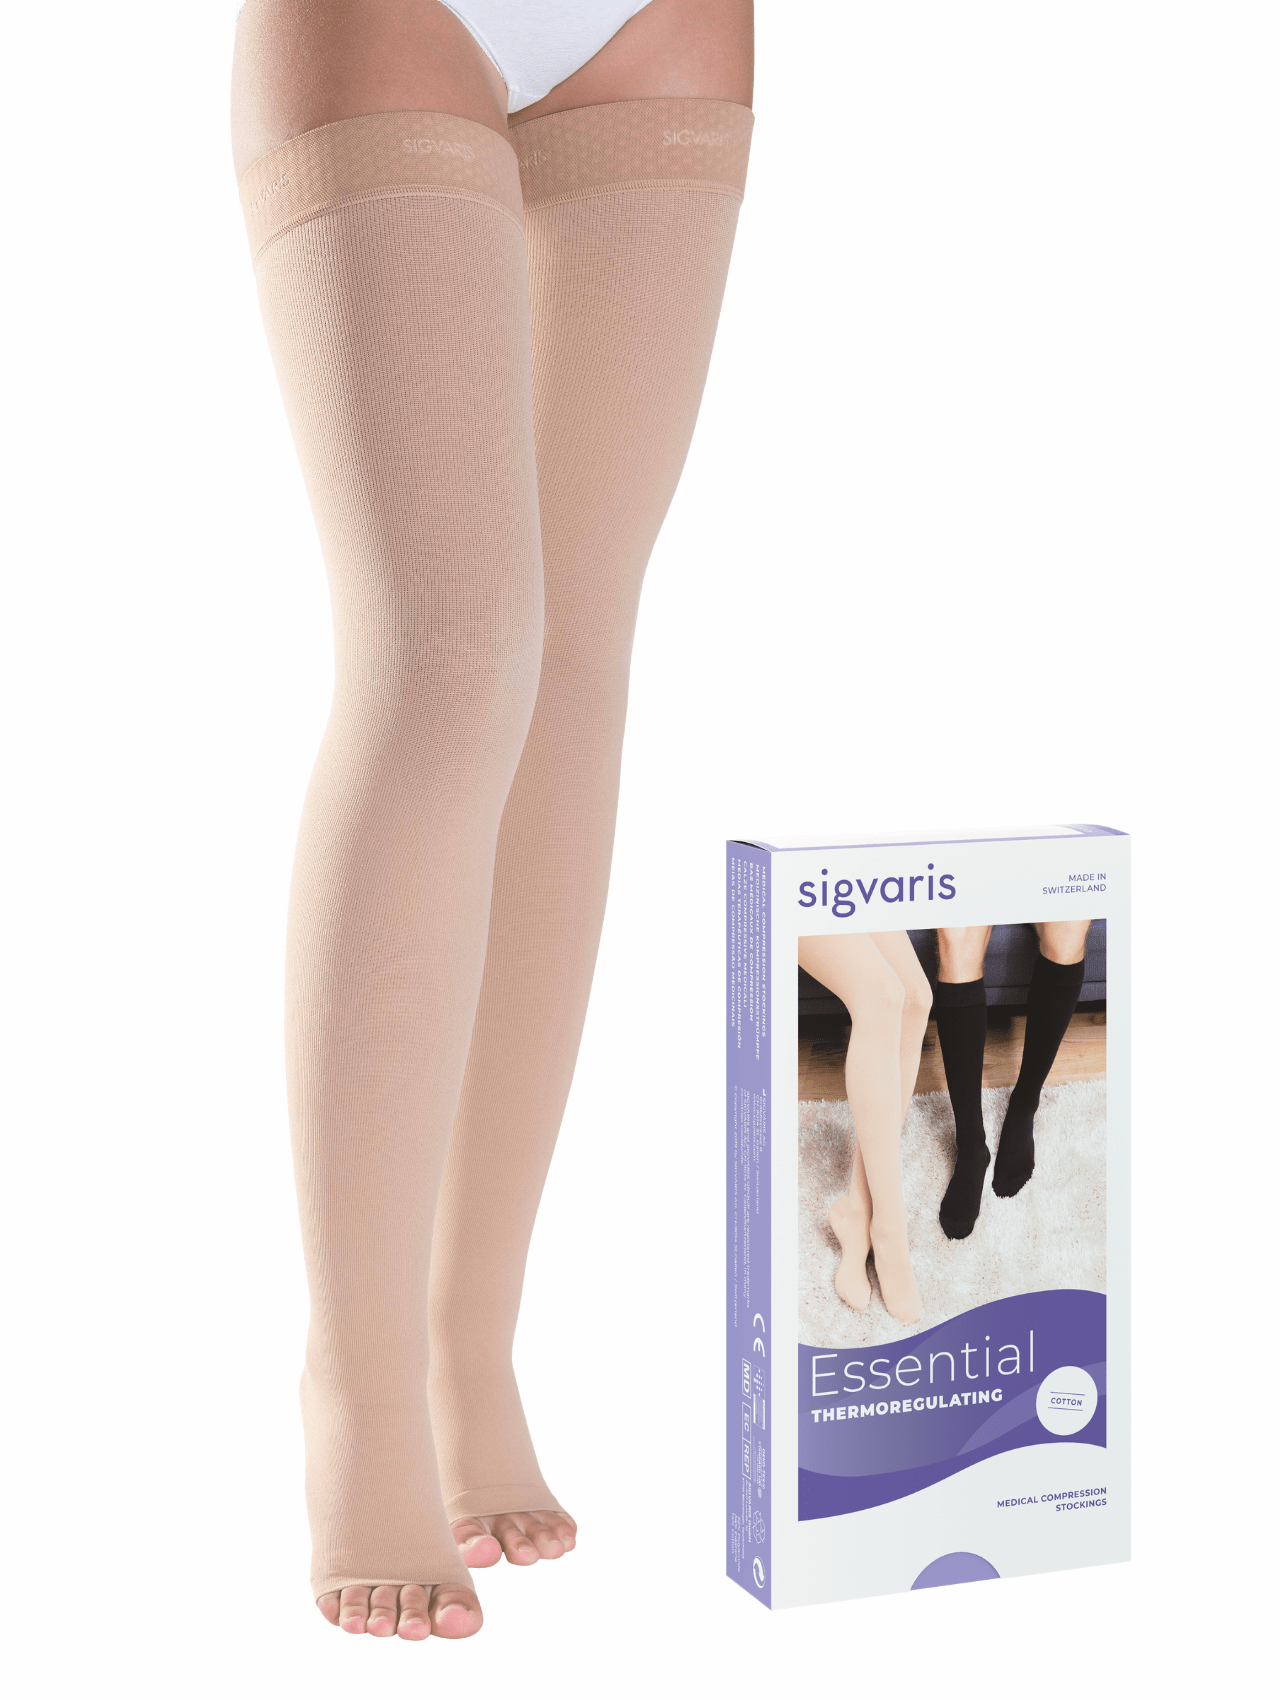 Class 2 Medical Compression for Thigh Length